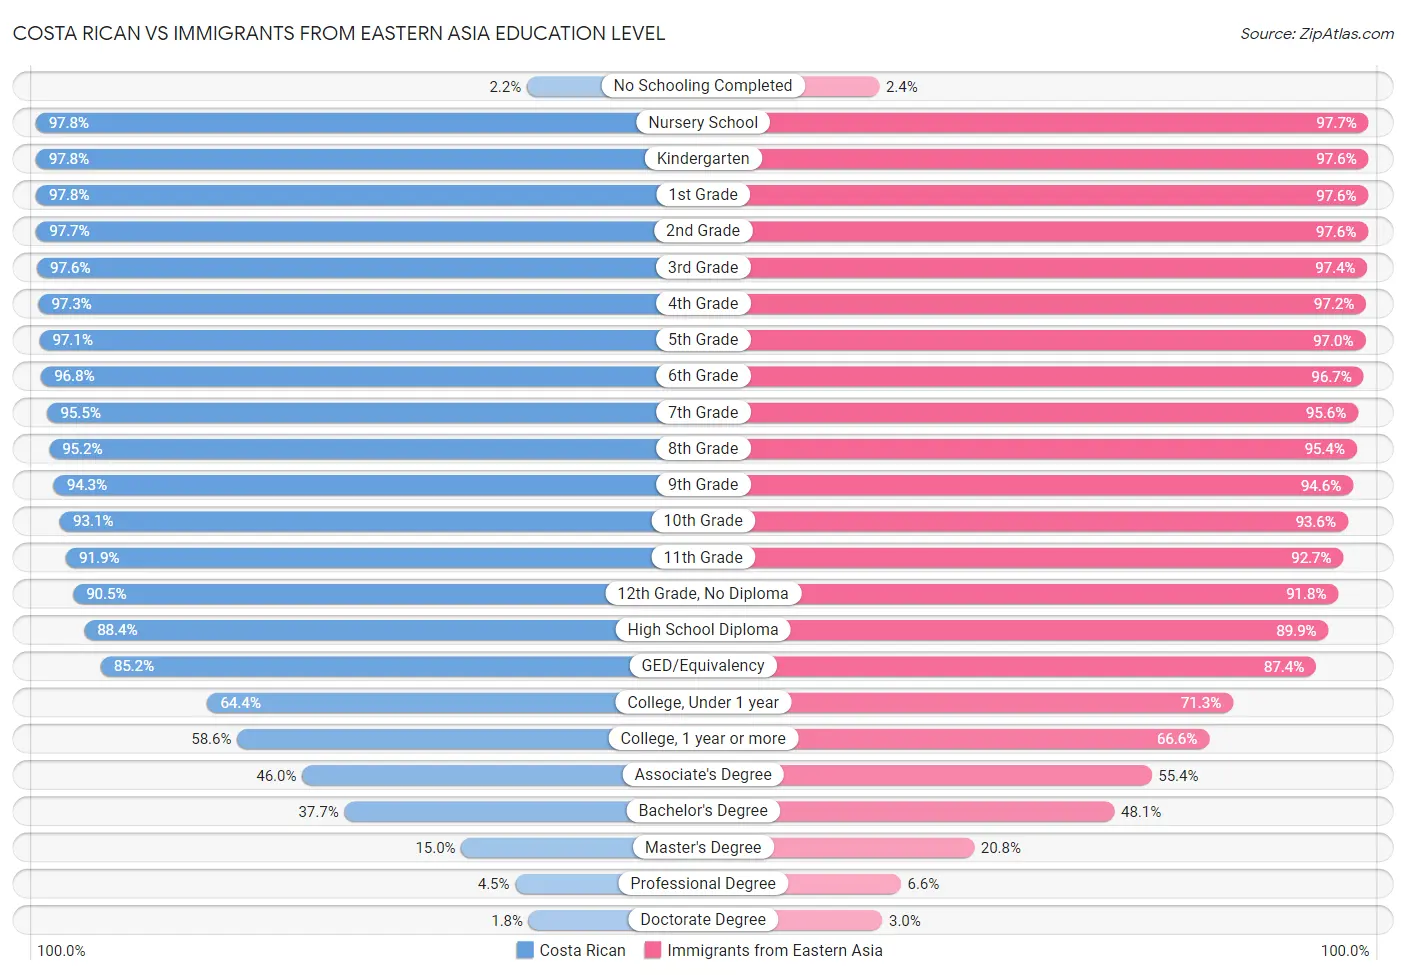 Costa Rican vs Immigrants from Eastern Asia Education Level